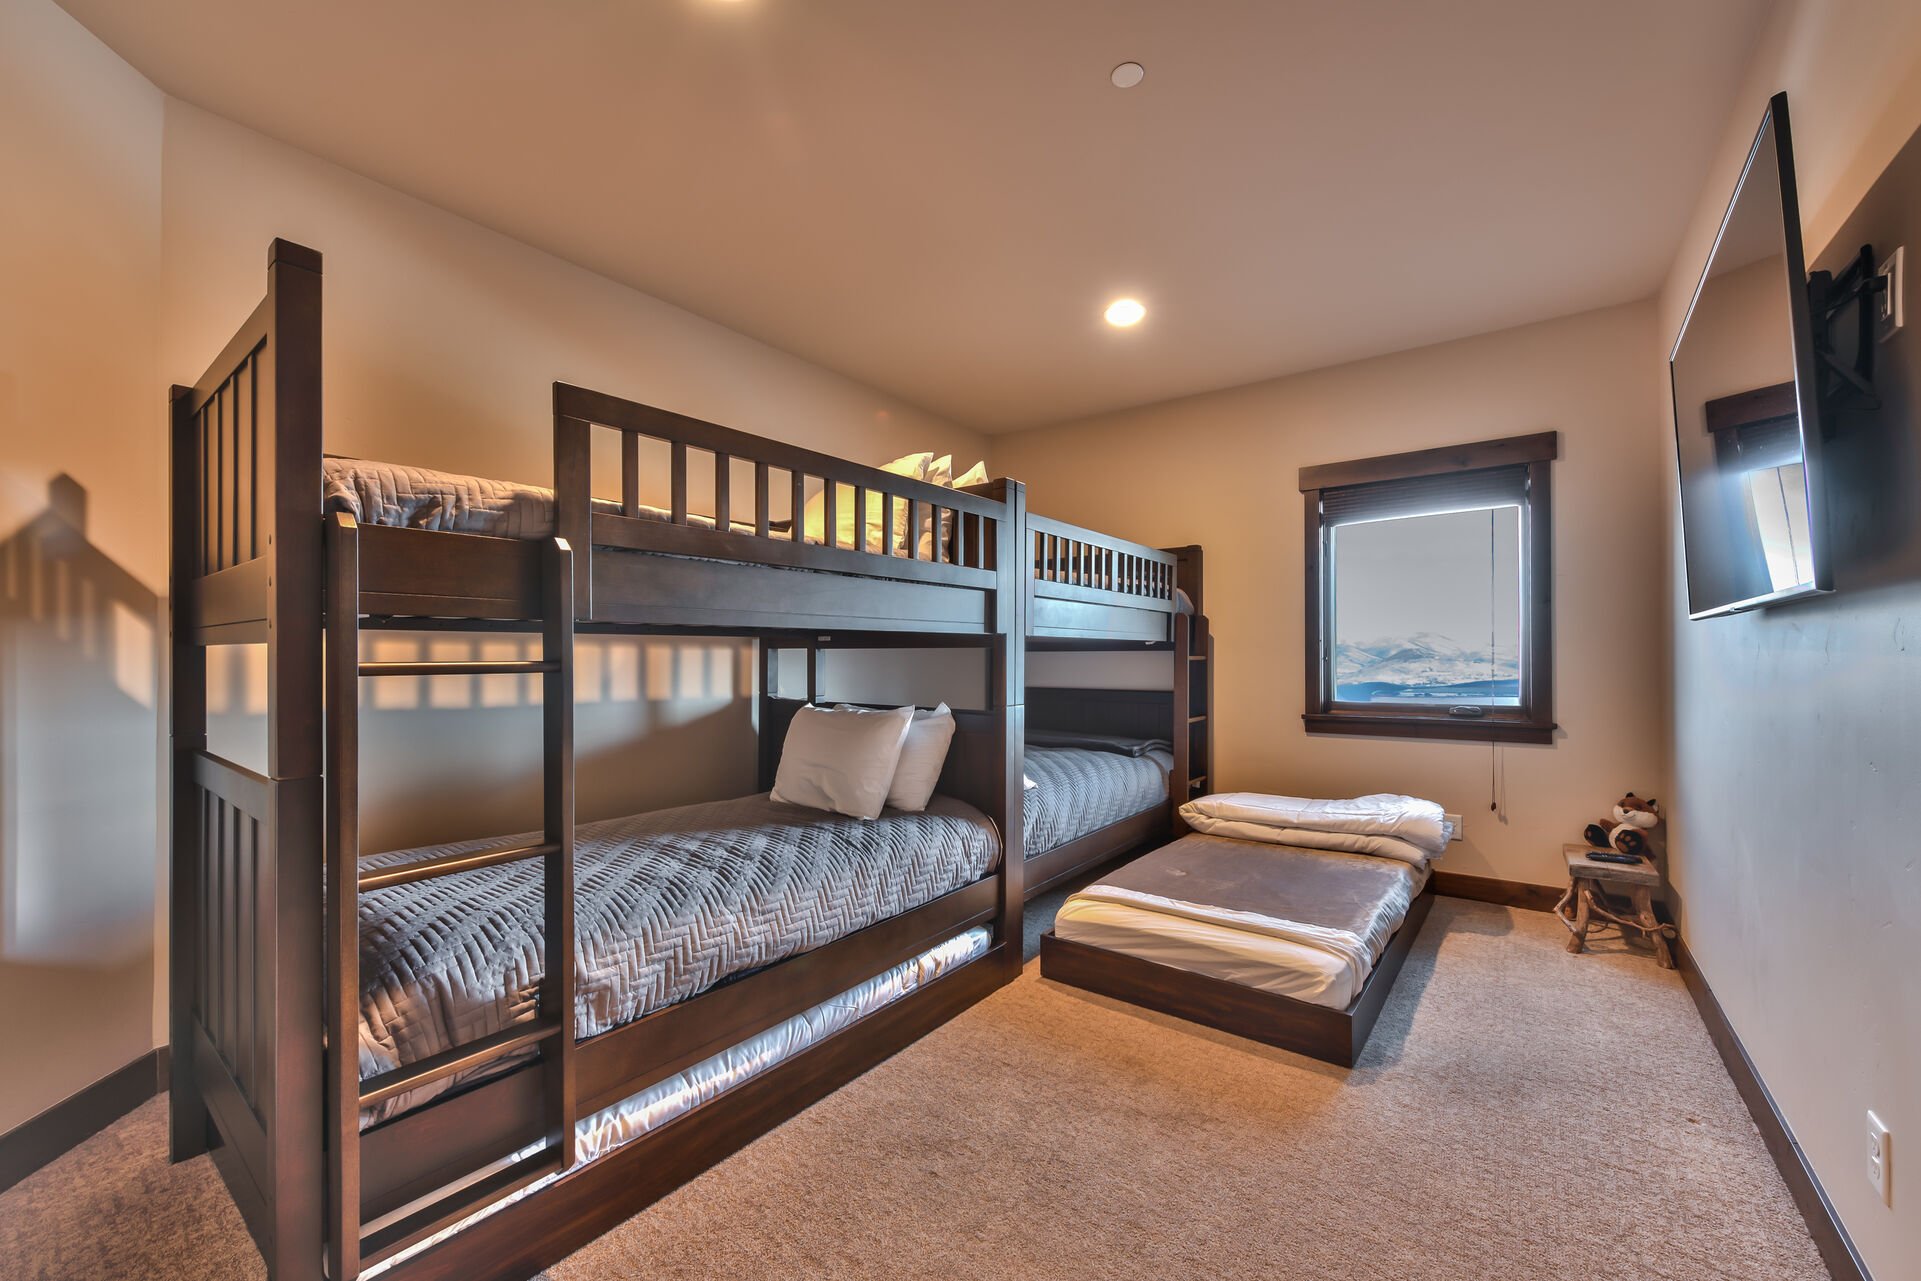 Bedroom 5 - Bunk Room with twin over twin Bunk Beds, Two Twin Trundles, 60